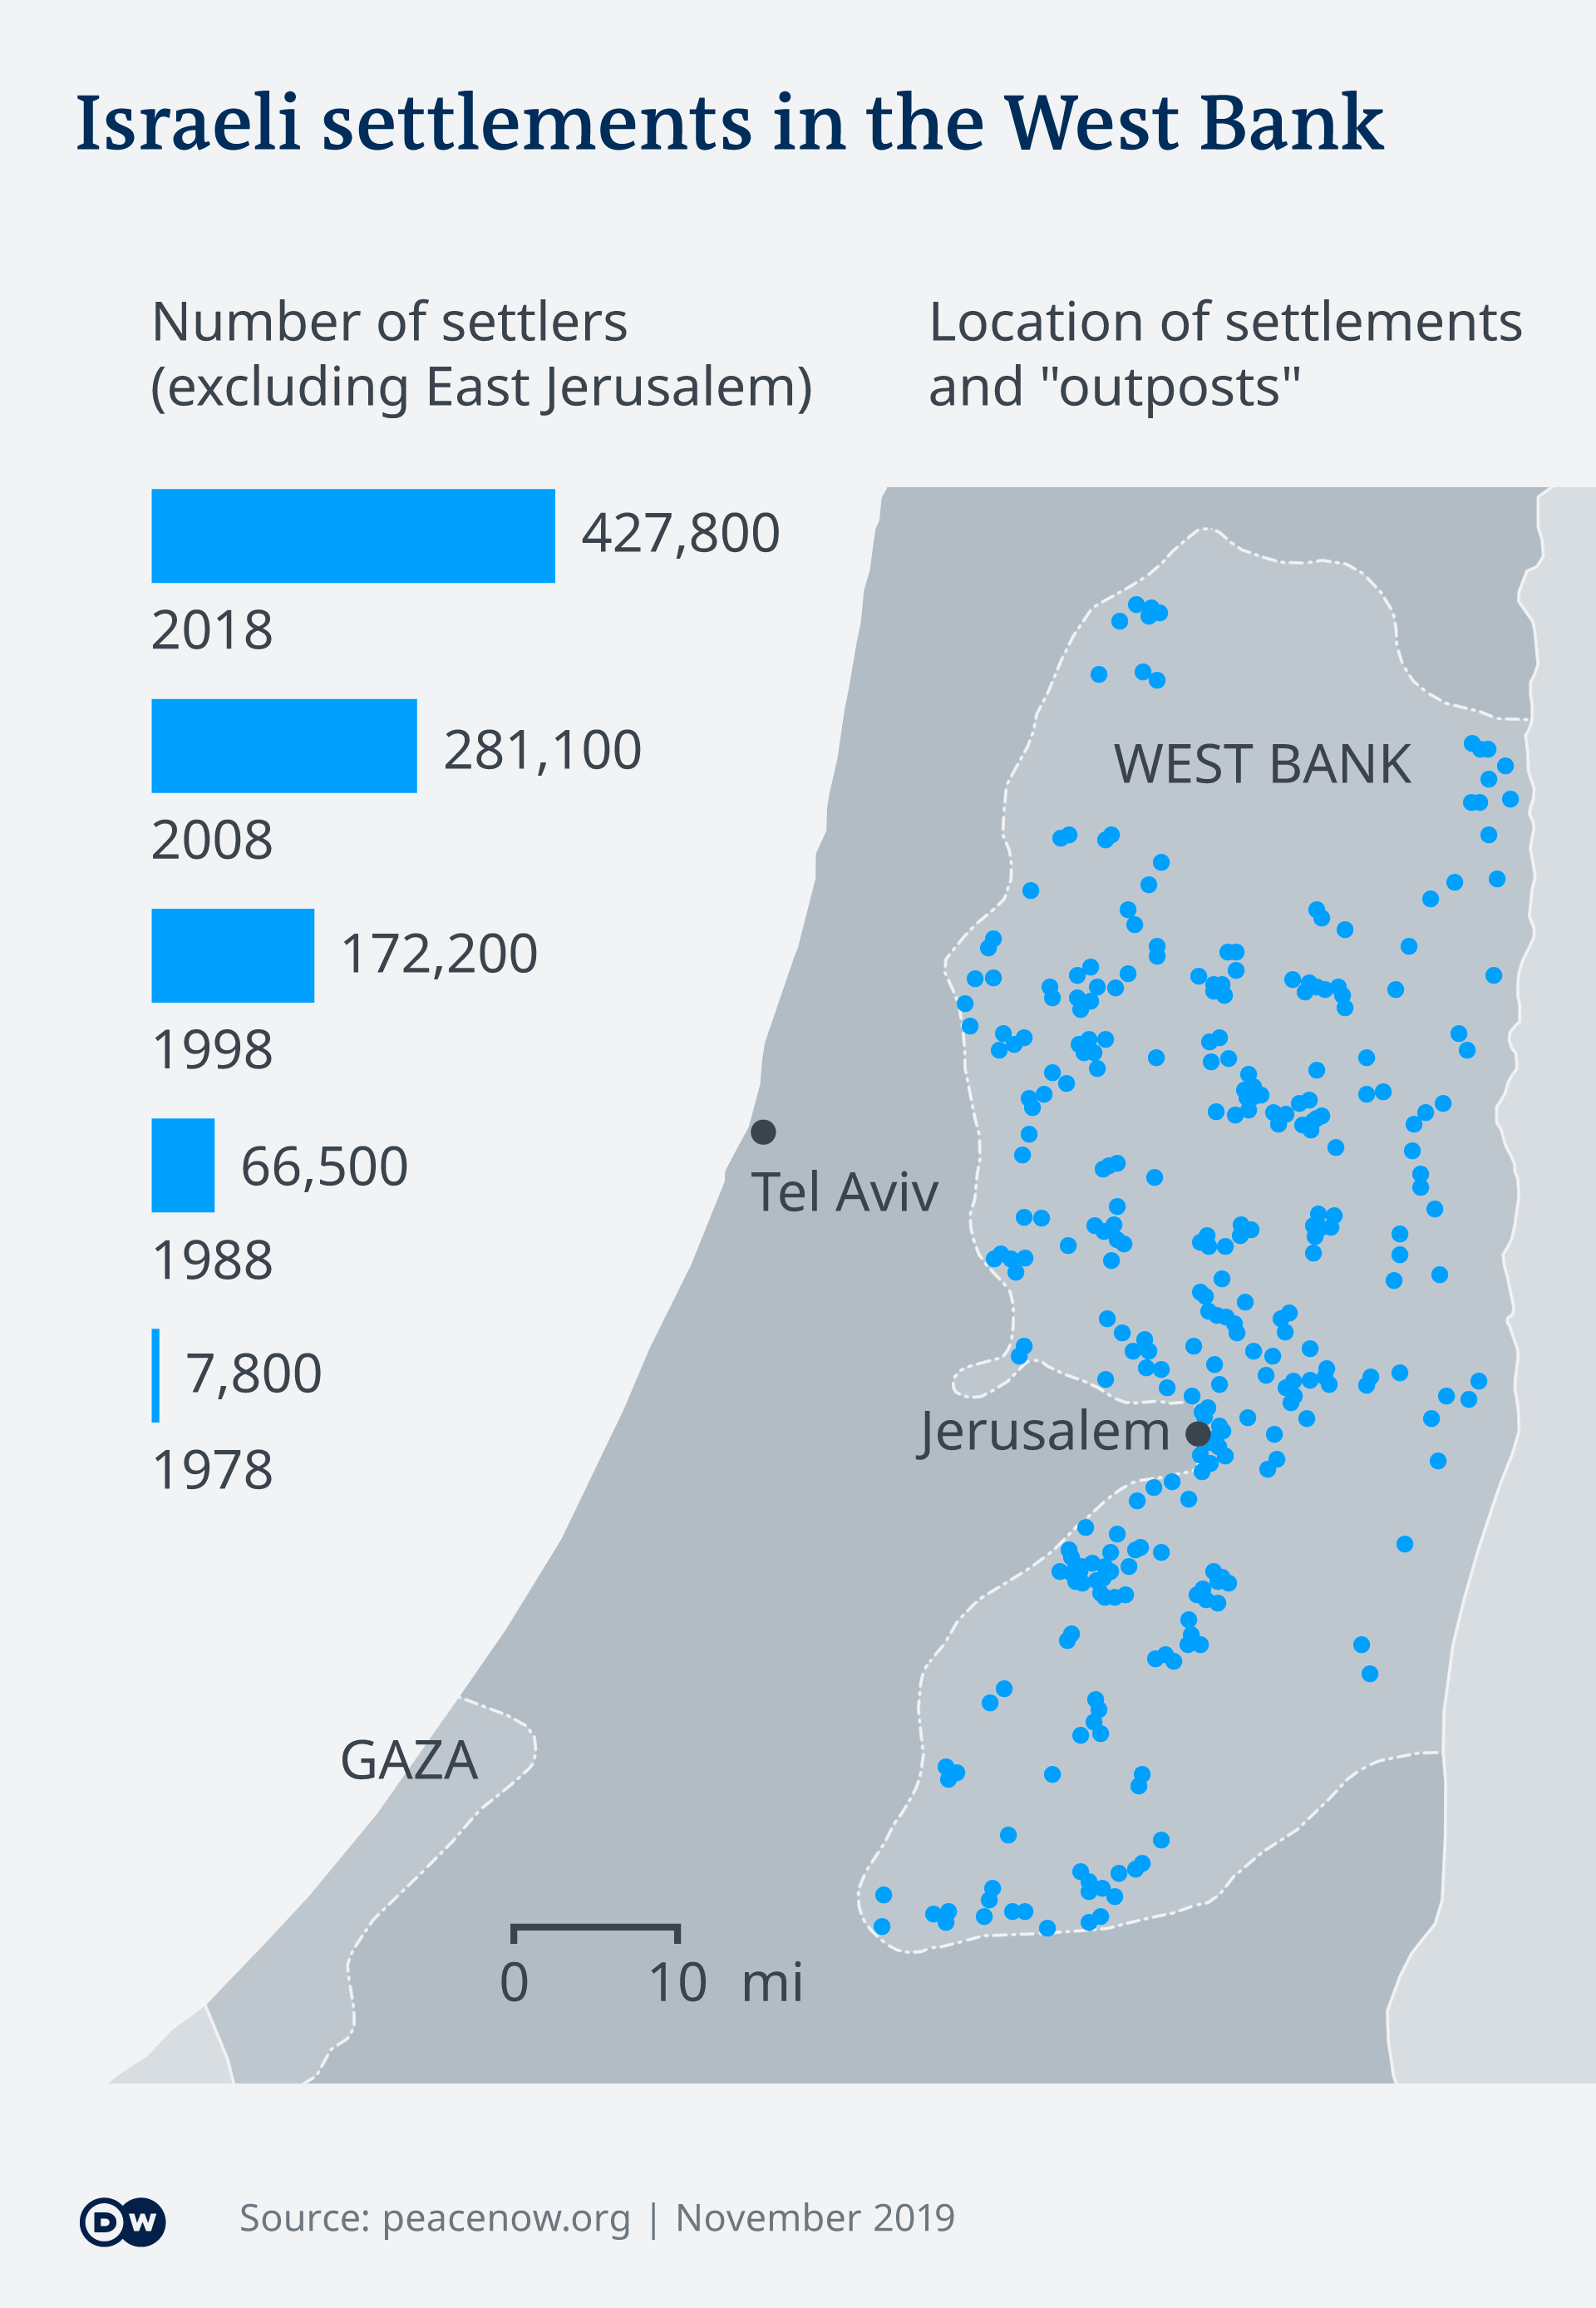 Map showing the number of Israeli settlers and the location of Israeli settlements in the West Bank (source: peacenow.org/DW.com)